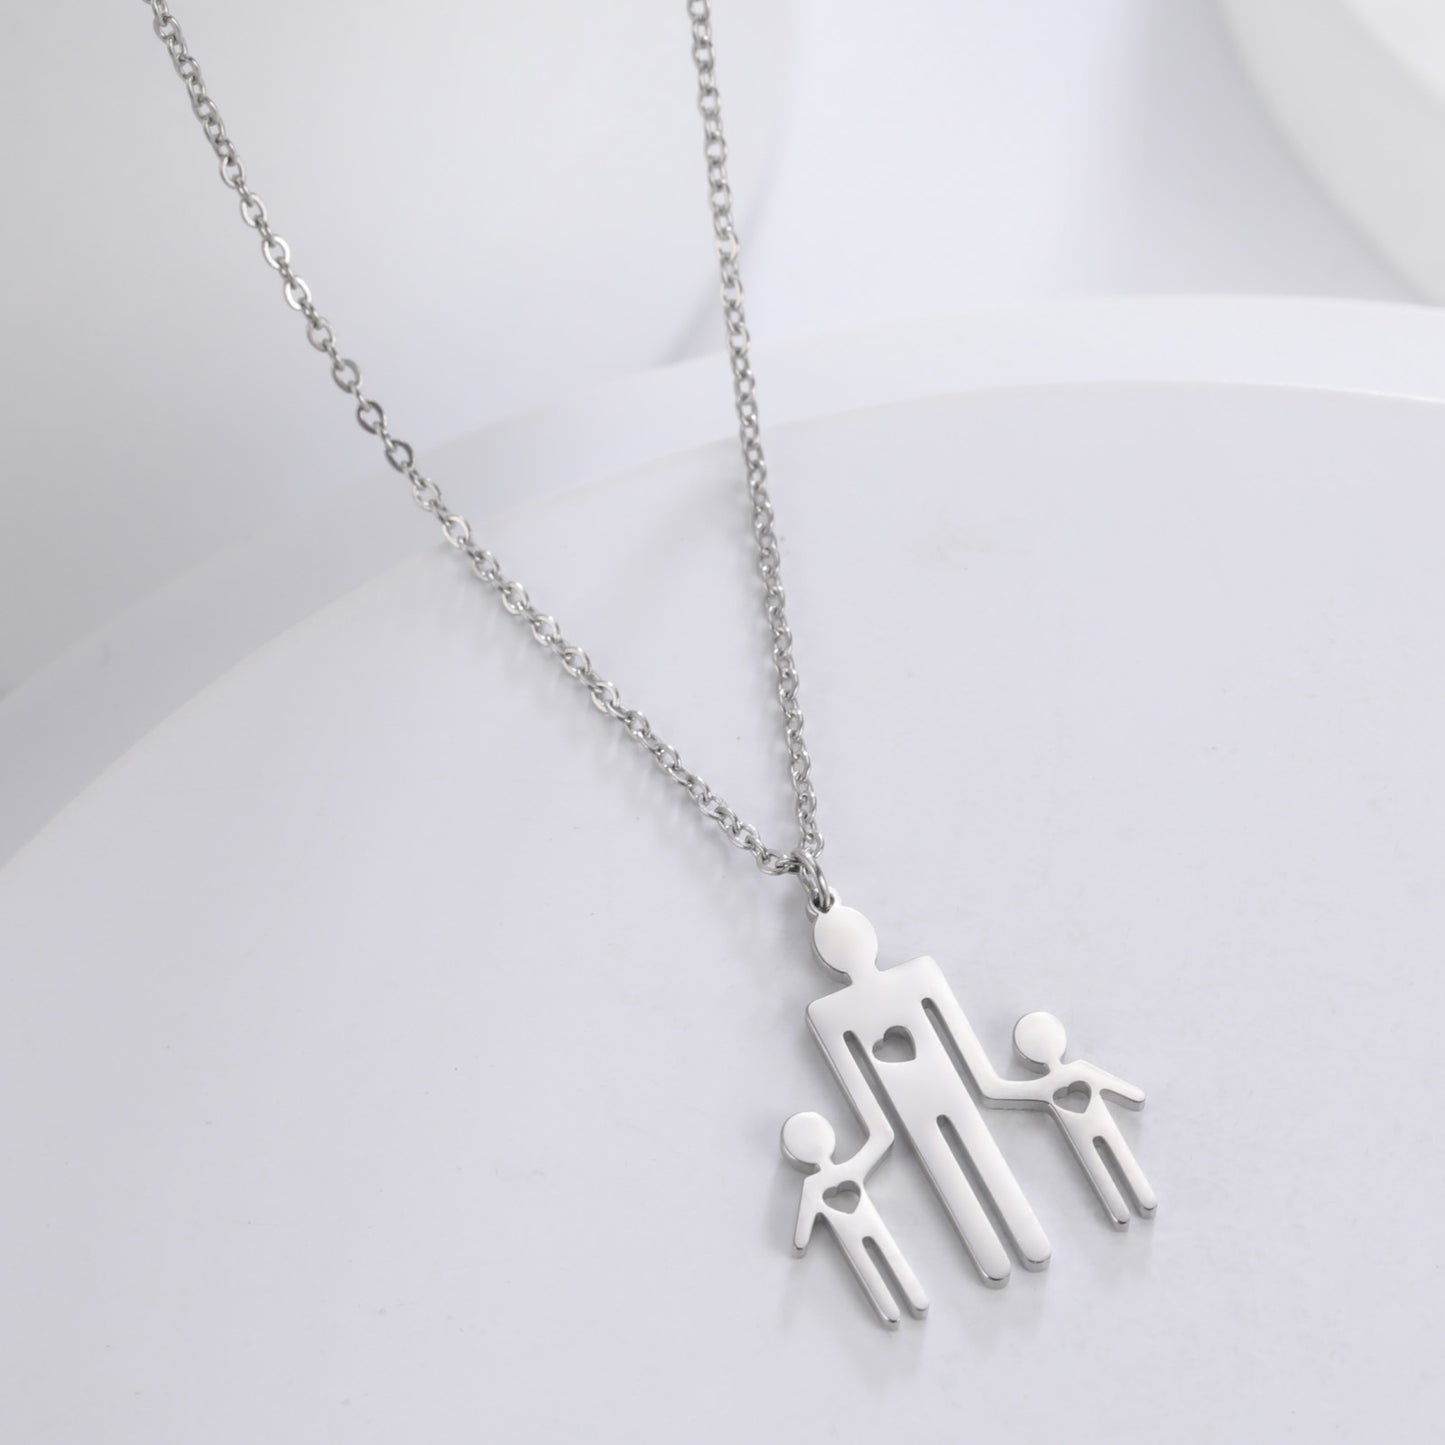 Family Series Titanium Steel Ornament Cut One Large Two Small 304 Material Stainless Steel Necklace